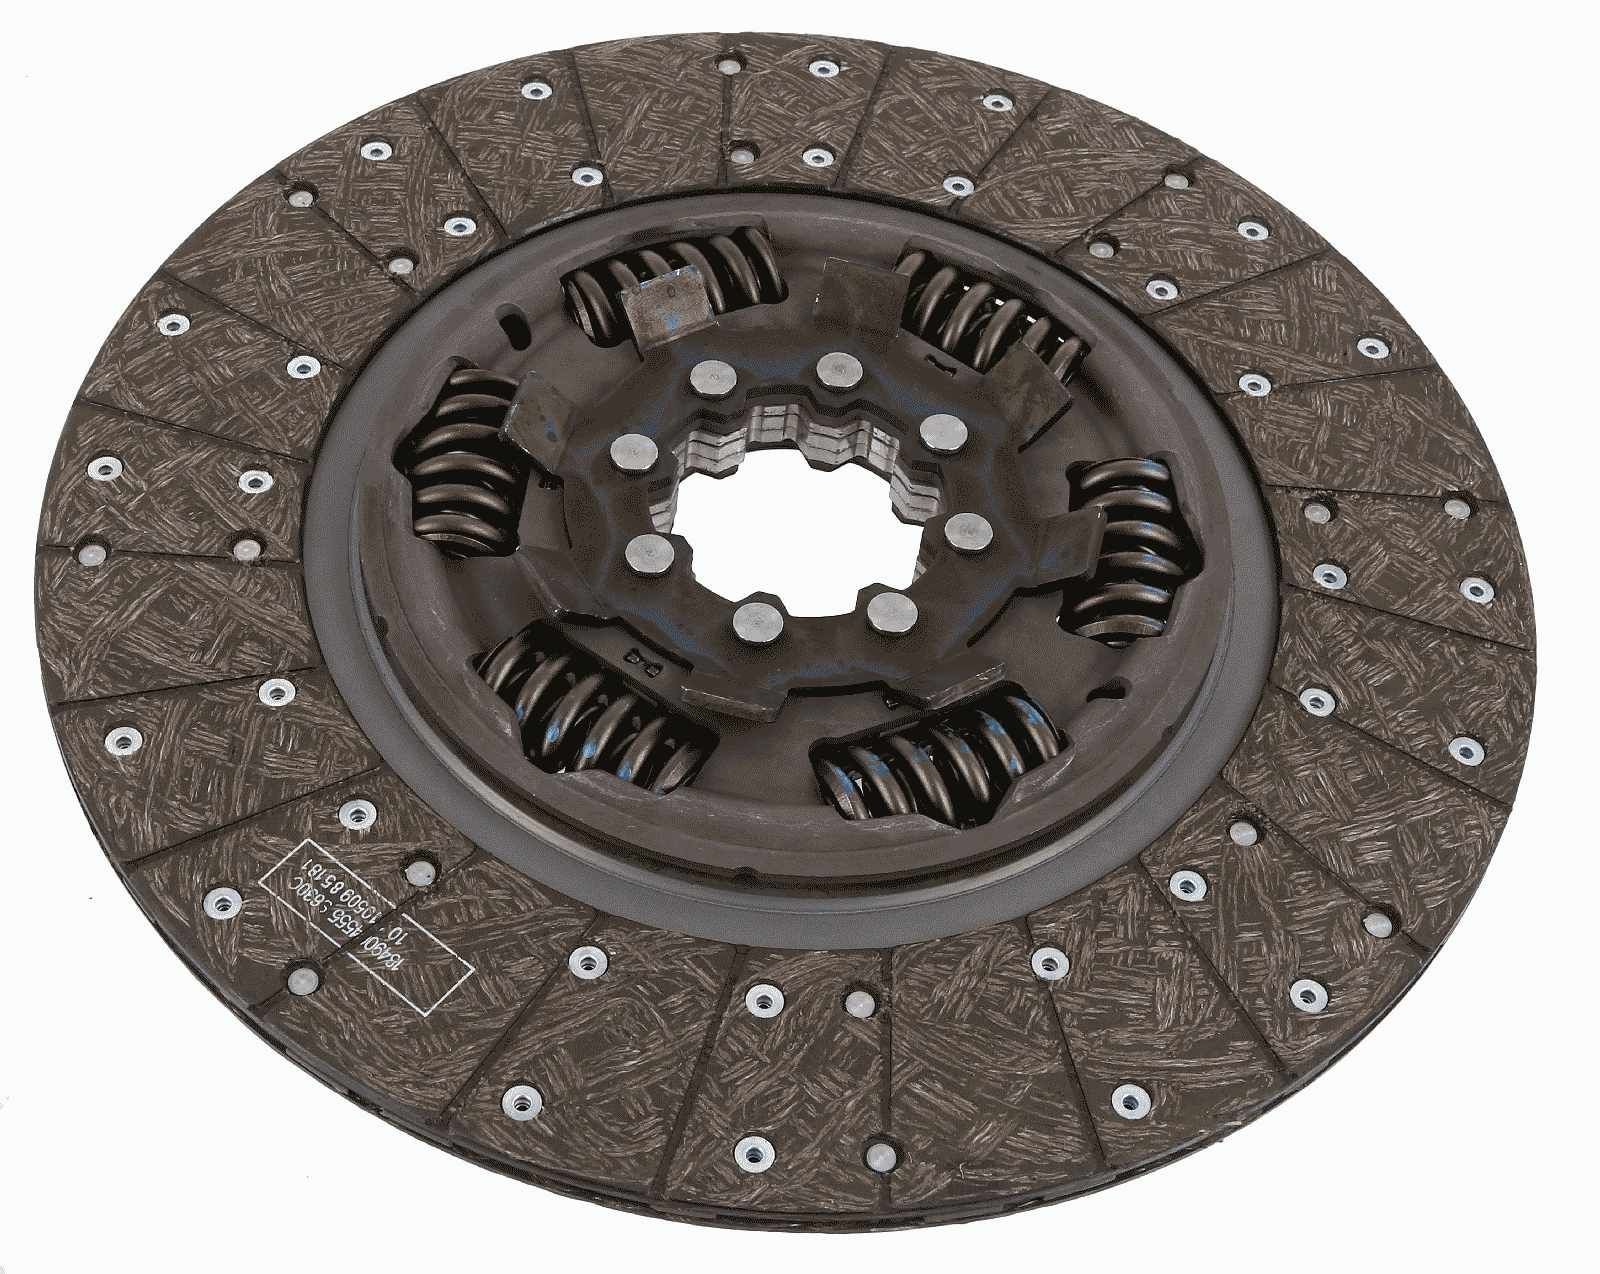 SACHS 400mm, Number of Teeth: 8, transmission sided Clutch Plate 1878 009 819 buy